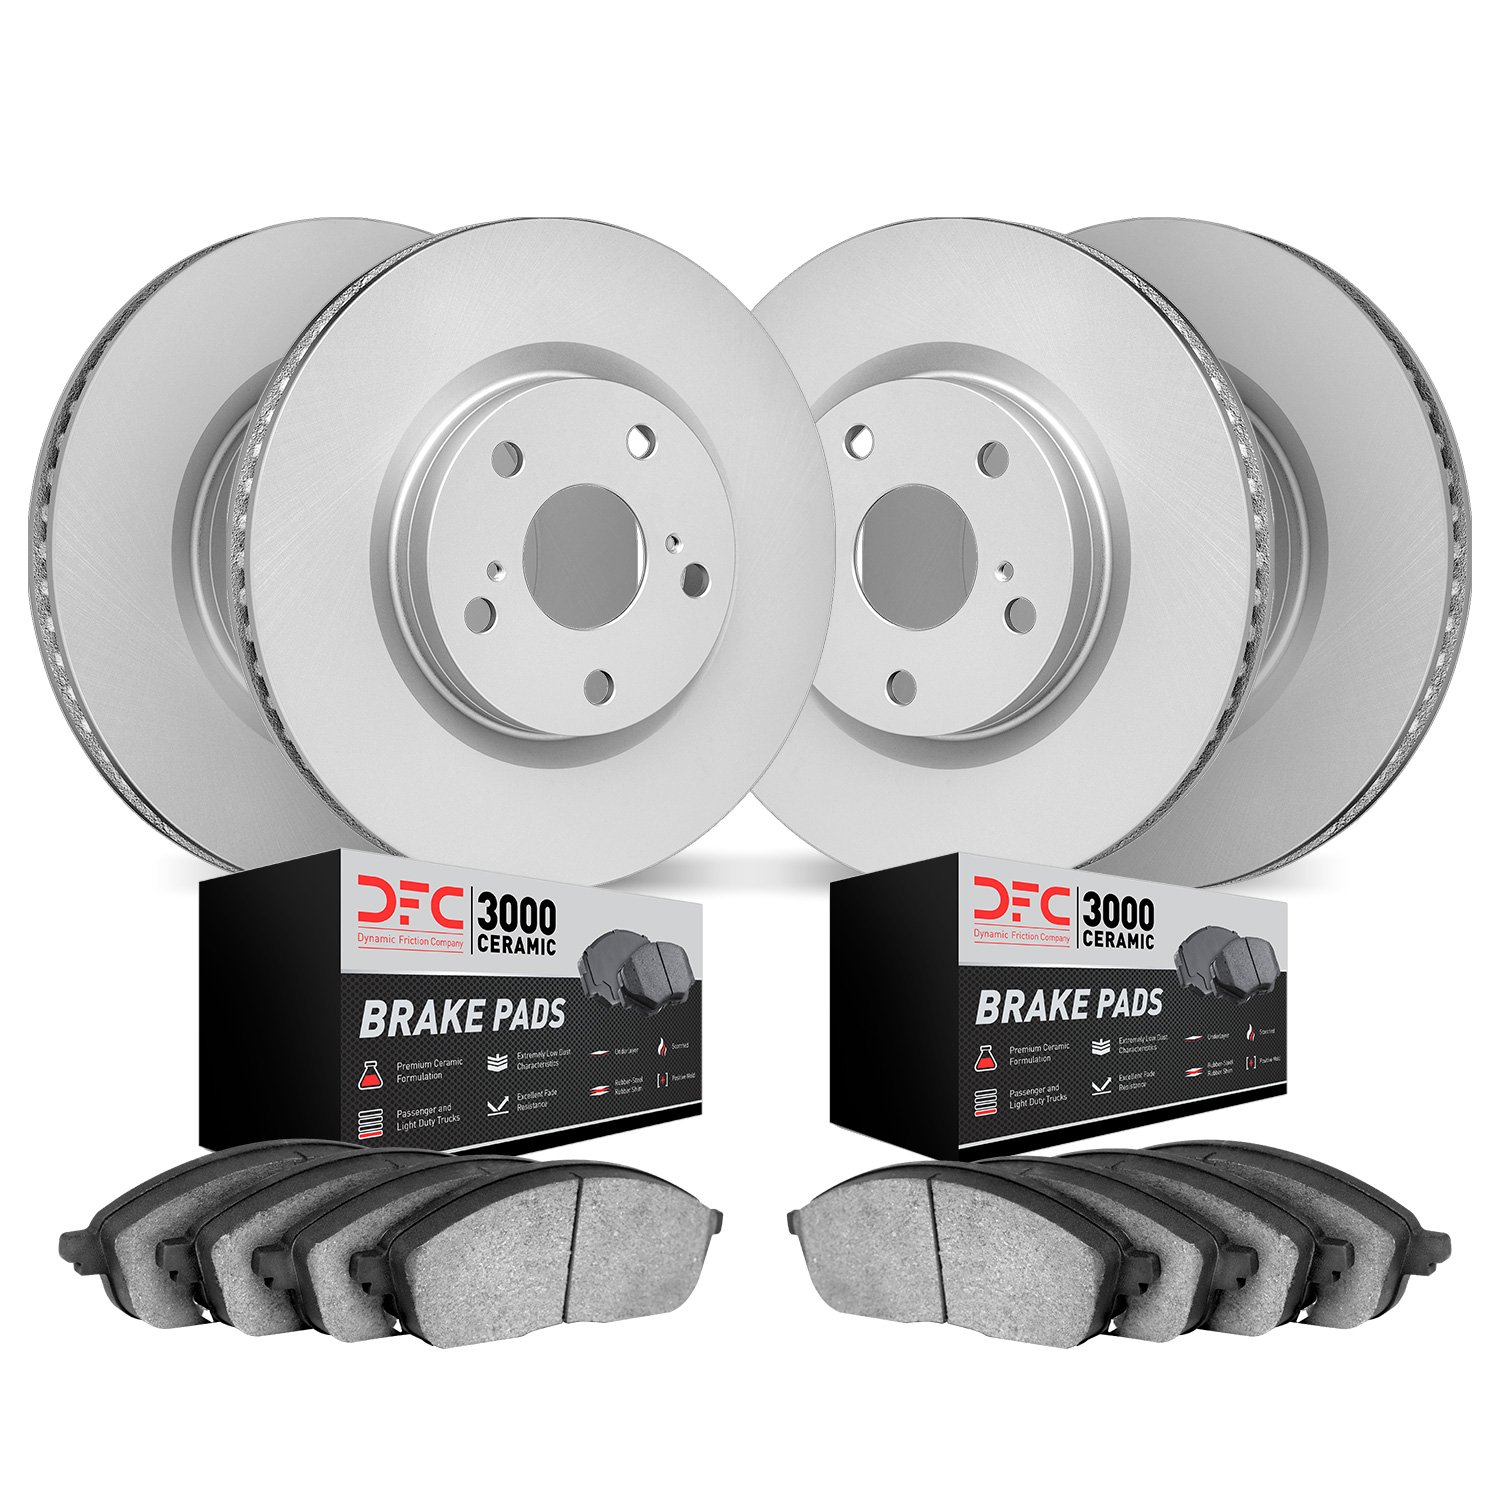 4304-73039 Geospec Brake Rotors with 3000-Series Ceramic Brake Pads Kit, 2014-2017 Audi/Volkswagen, Position: Front and Rear